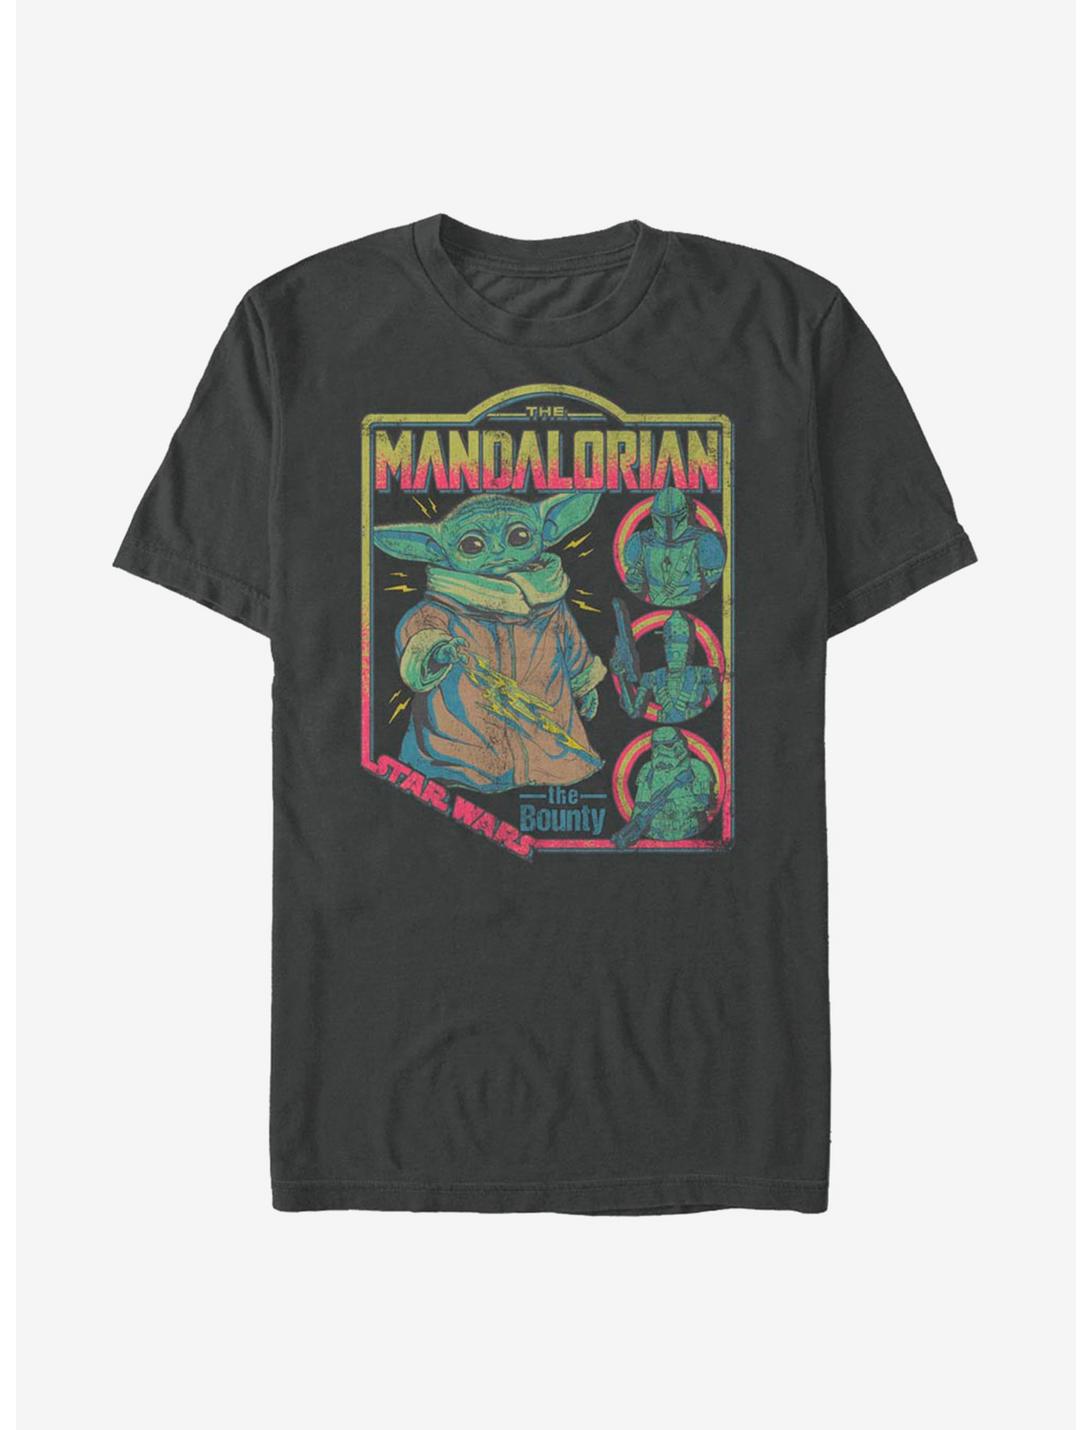 Extra Soft Star Wars The Mandalorian The Child Poster T-Shirt, CHARCOAL, hi-res